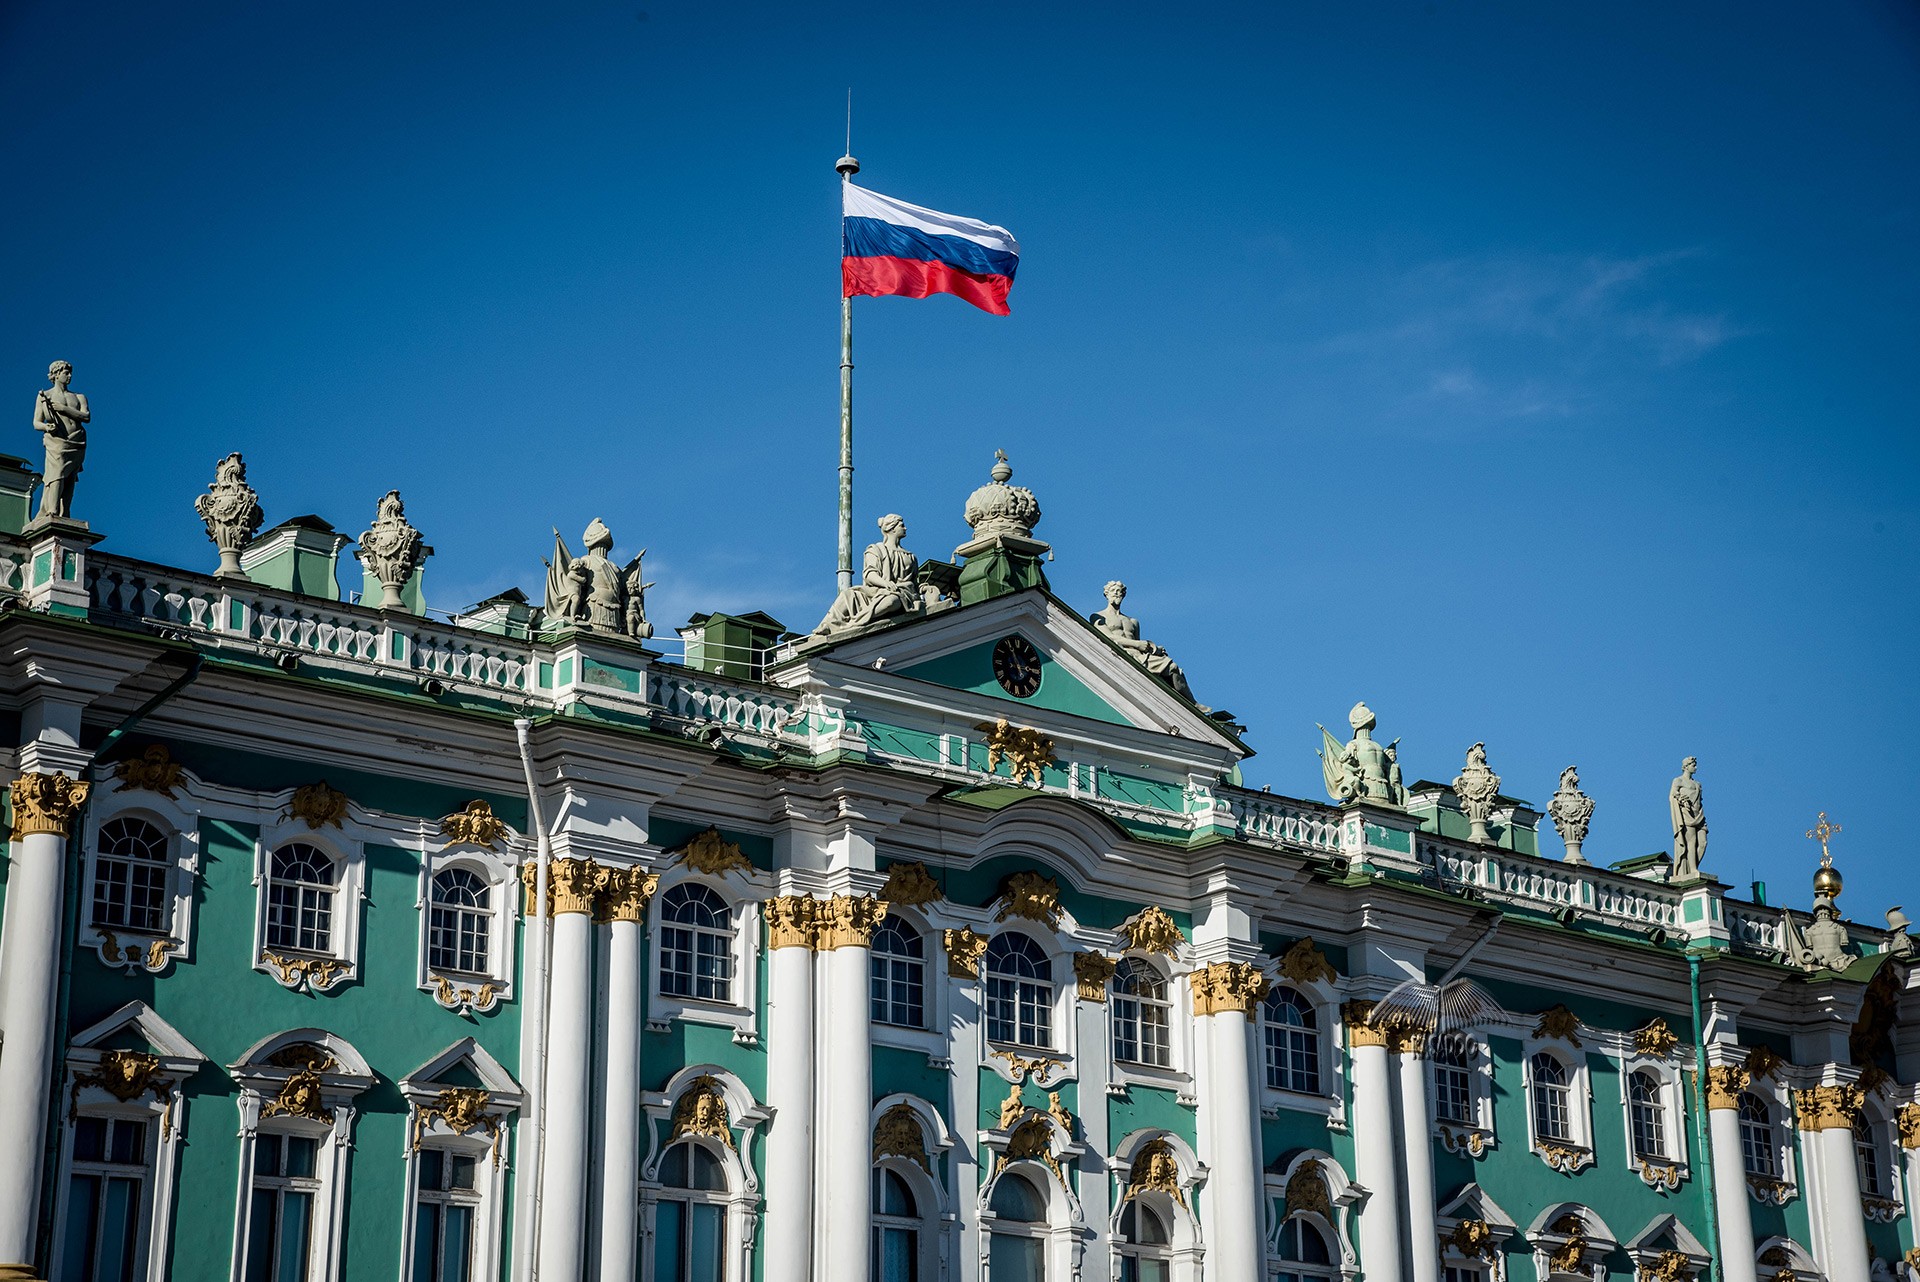 Waving Russian Flag On The Top Of The Hermitage Museum In St. Petersburg,  Russia Stock Photo, Picture and Royalty Free Image. Image 150523844.